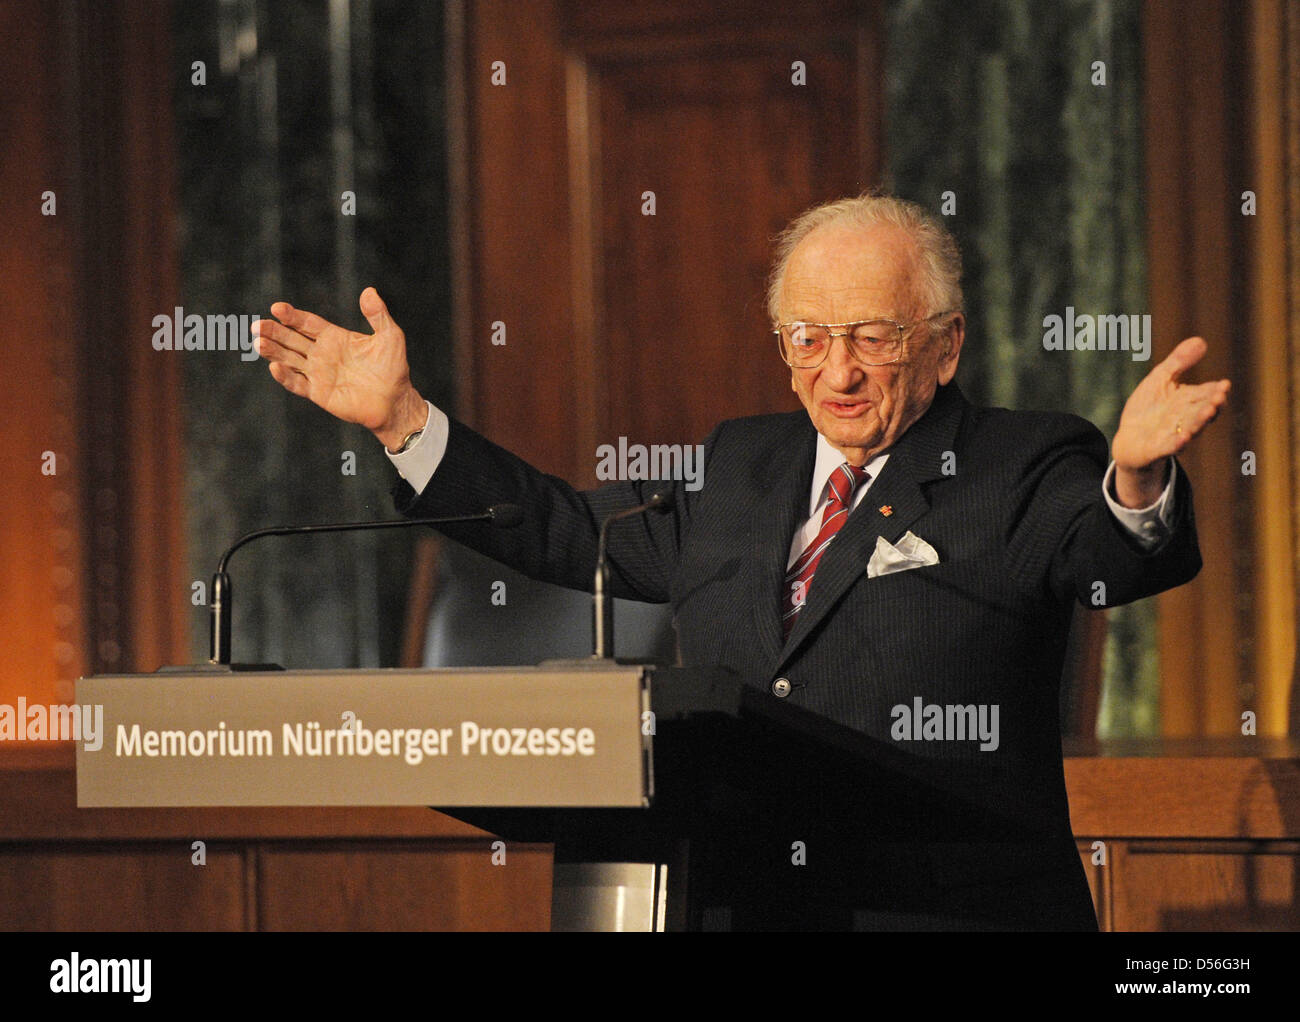 Former chief prosecutor of the Einsatzgruppen Trial Benjamin Ferencz speaks at the opening of the 'Nuremberg Trials Memorium' at the regional court Nuremberg-Fuerth in Nuremberg, Germany, 21 November 2010. The Nuremberg Trials were held in Room 600 of the state court, which has now been turned into a museum. Photo: ARMIN WEIGEL Stock Photo